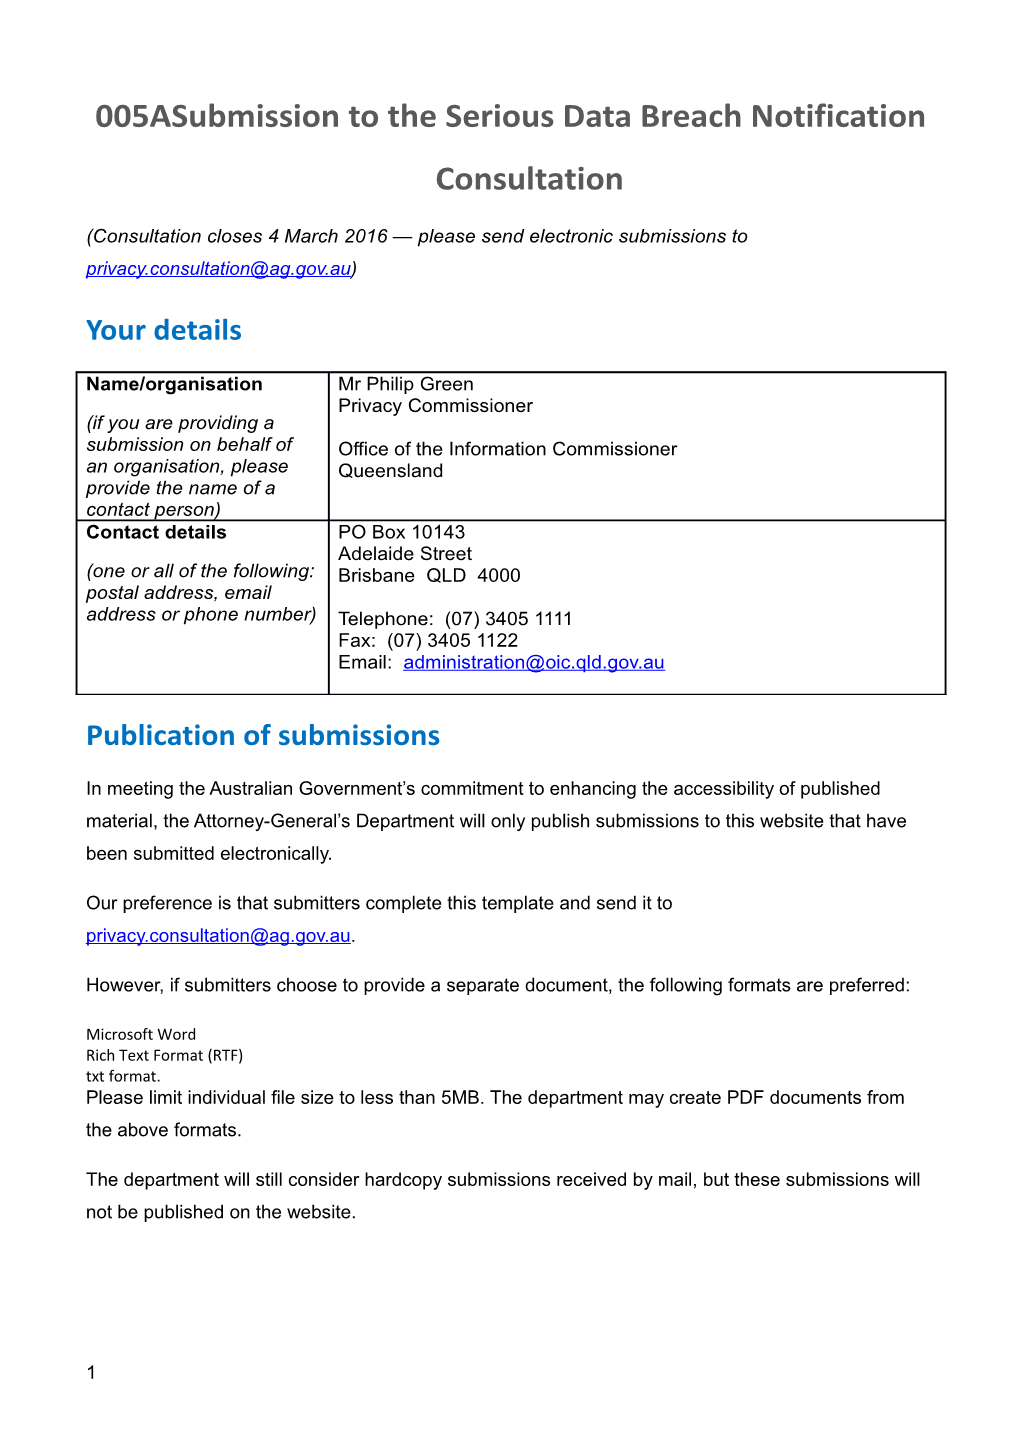 Serious Data Breach Notification Submission - Office of the Information Commissioner Queensland